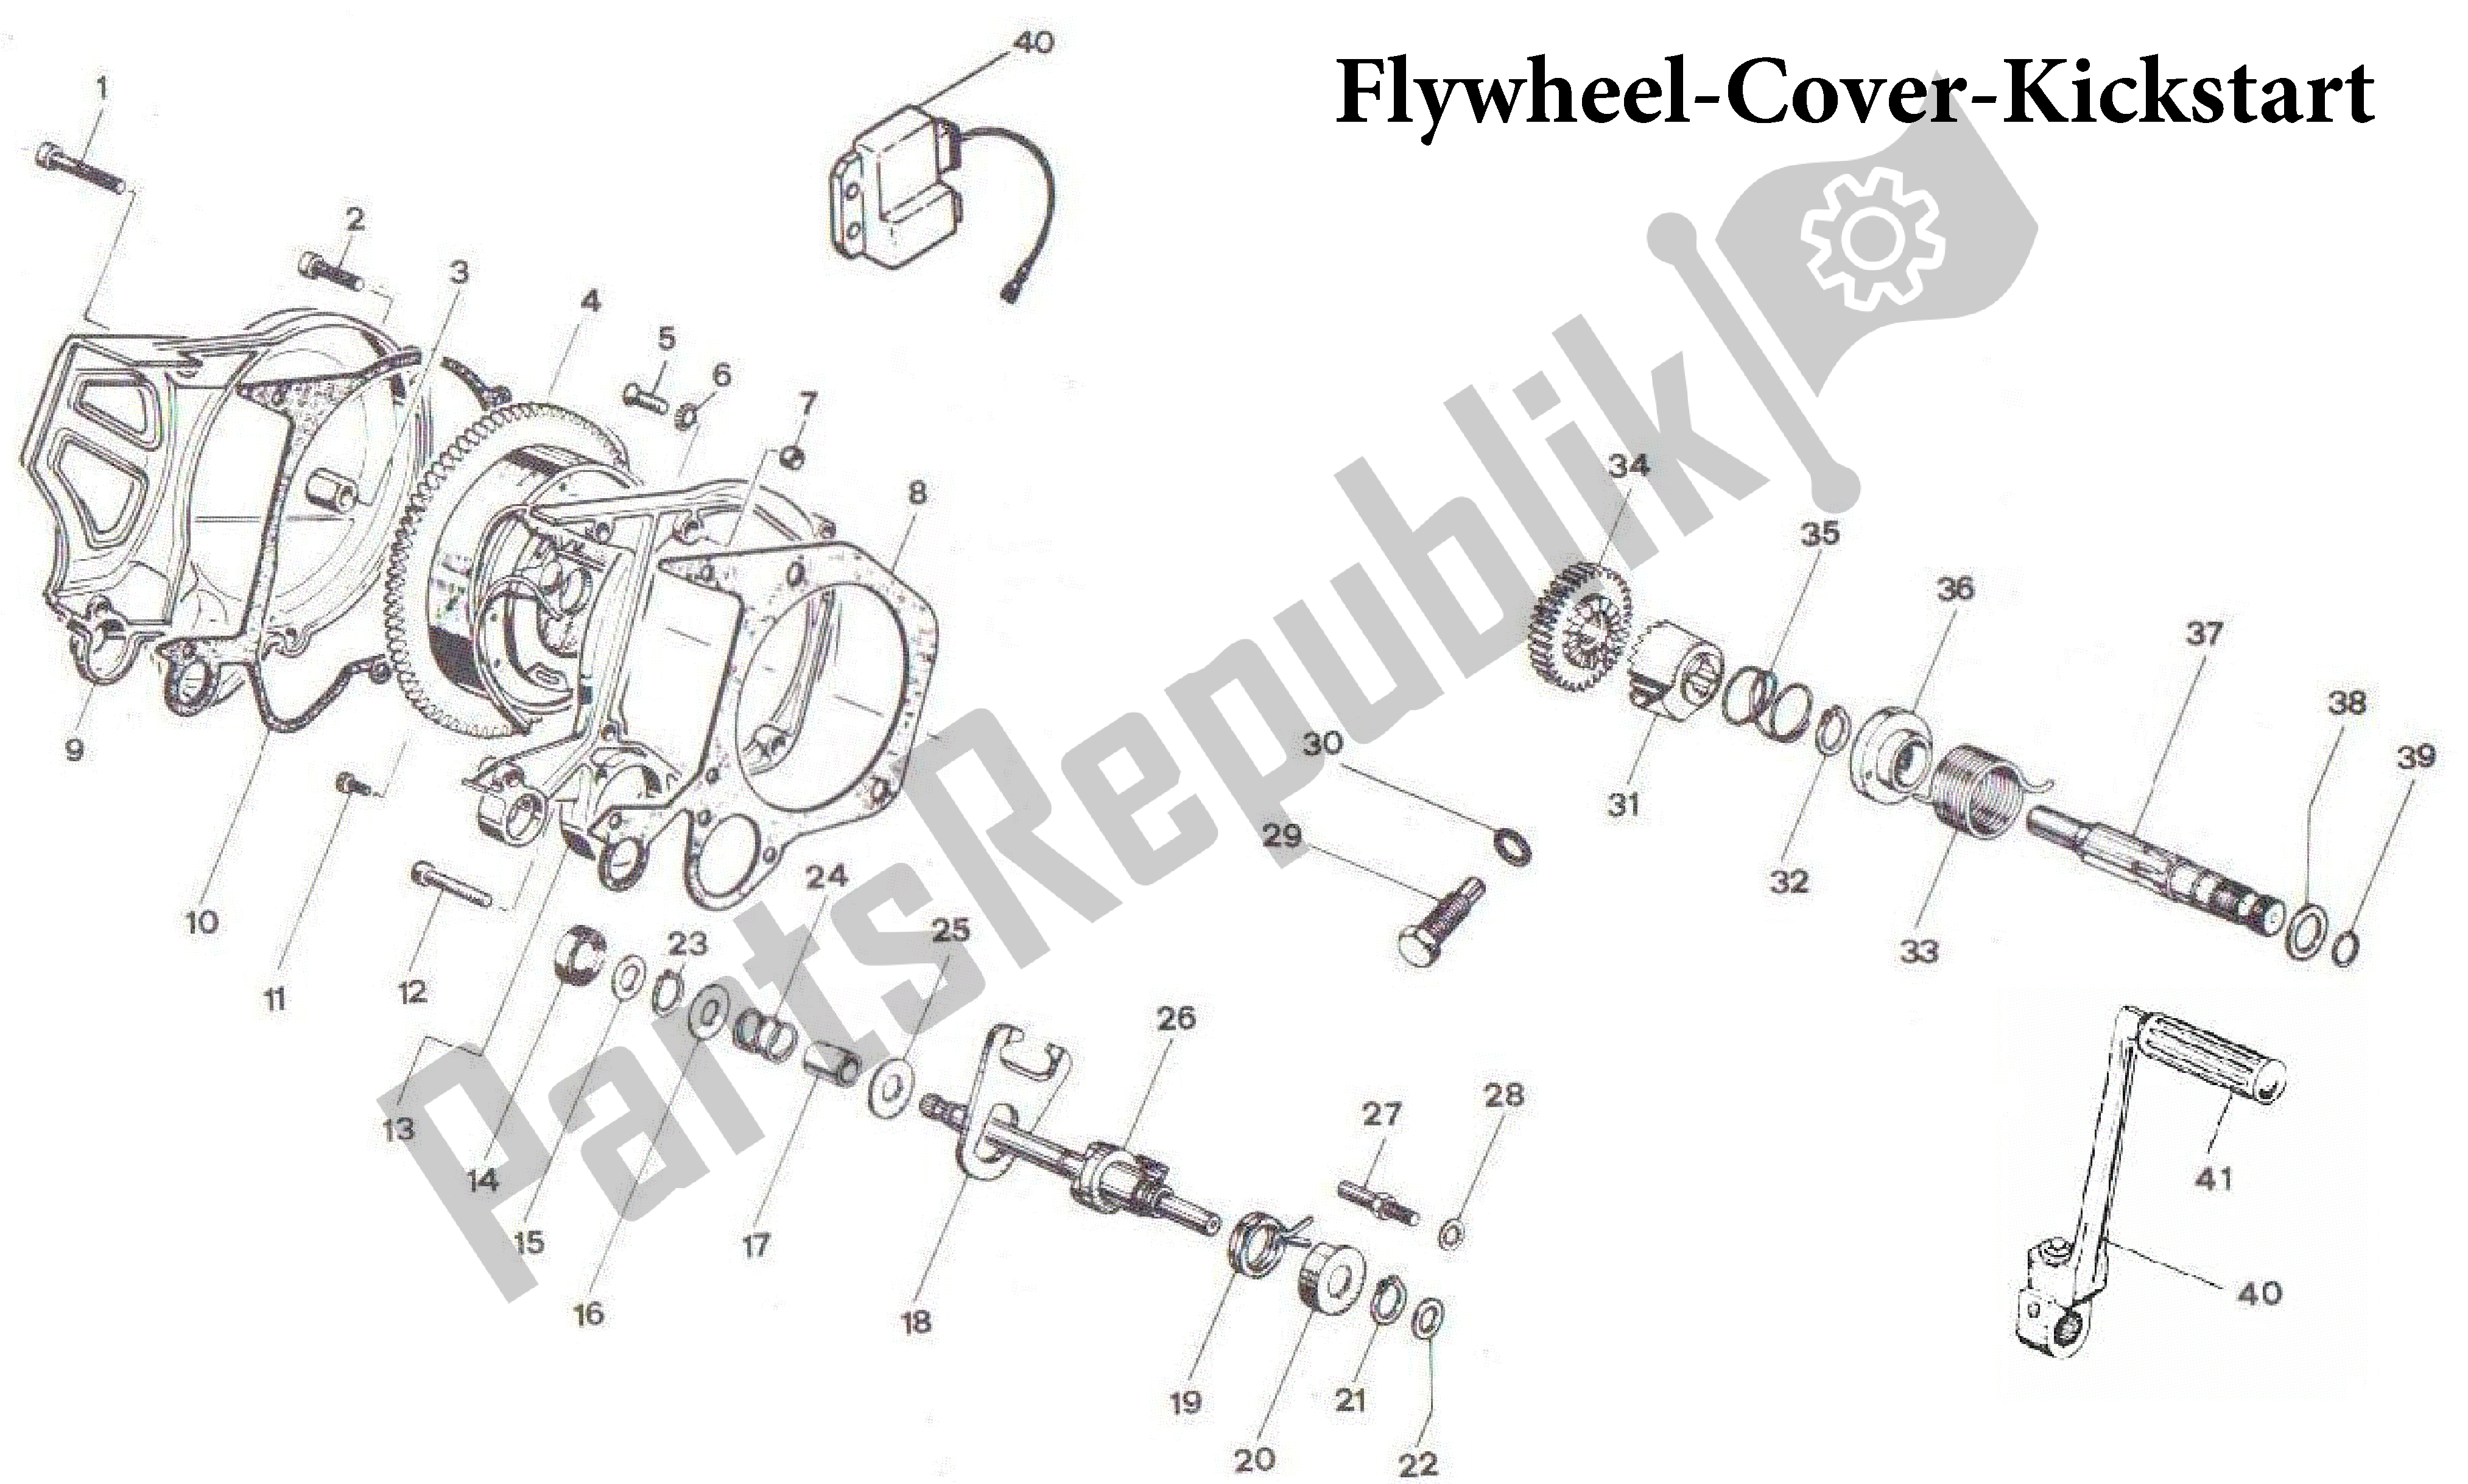 All parts for the Flywheel-cover-kickstart of the Aprilia AF1 50 1989